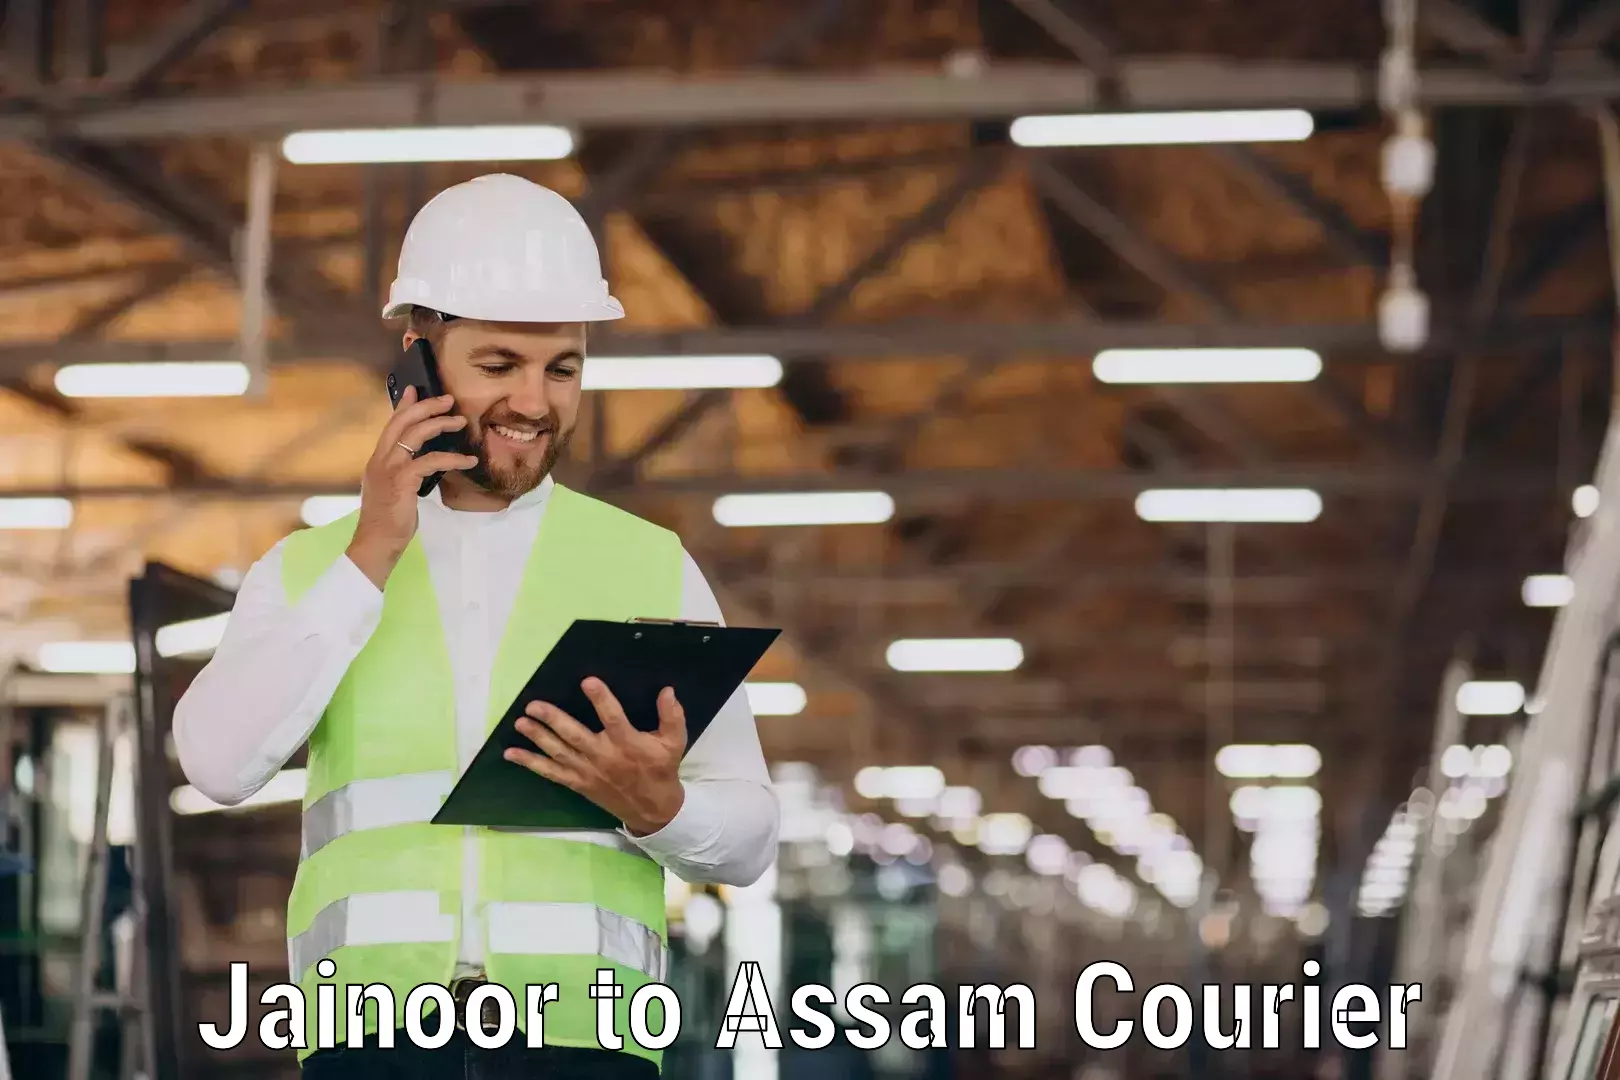 On-call courier service in Jainoor to Nagaon